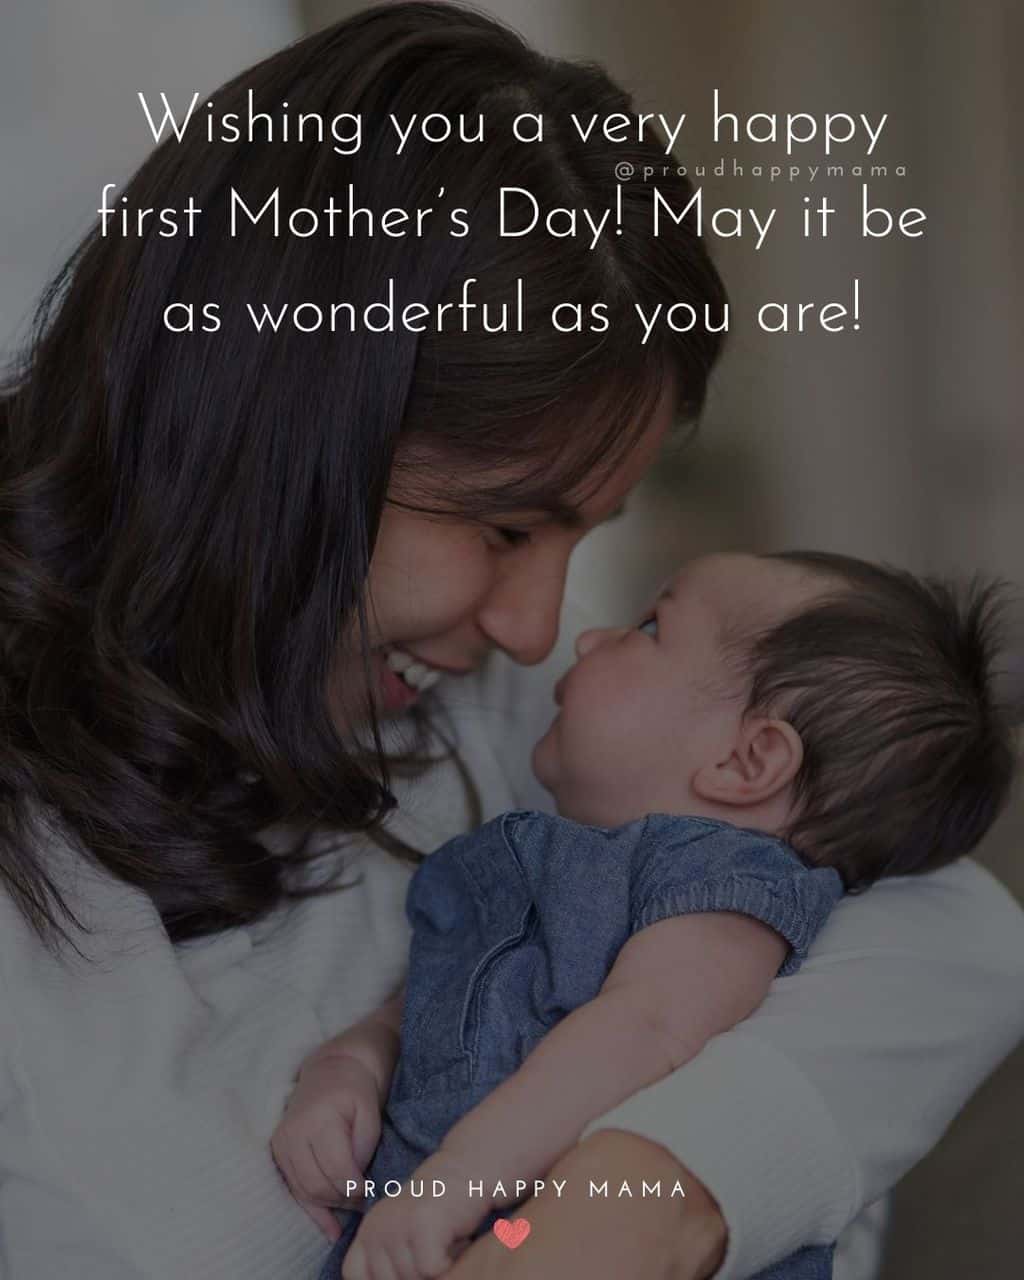 First Mothers Day Quotes - Wishing you a very happy first Mother’s Day! May it be as wonderful as you are!’